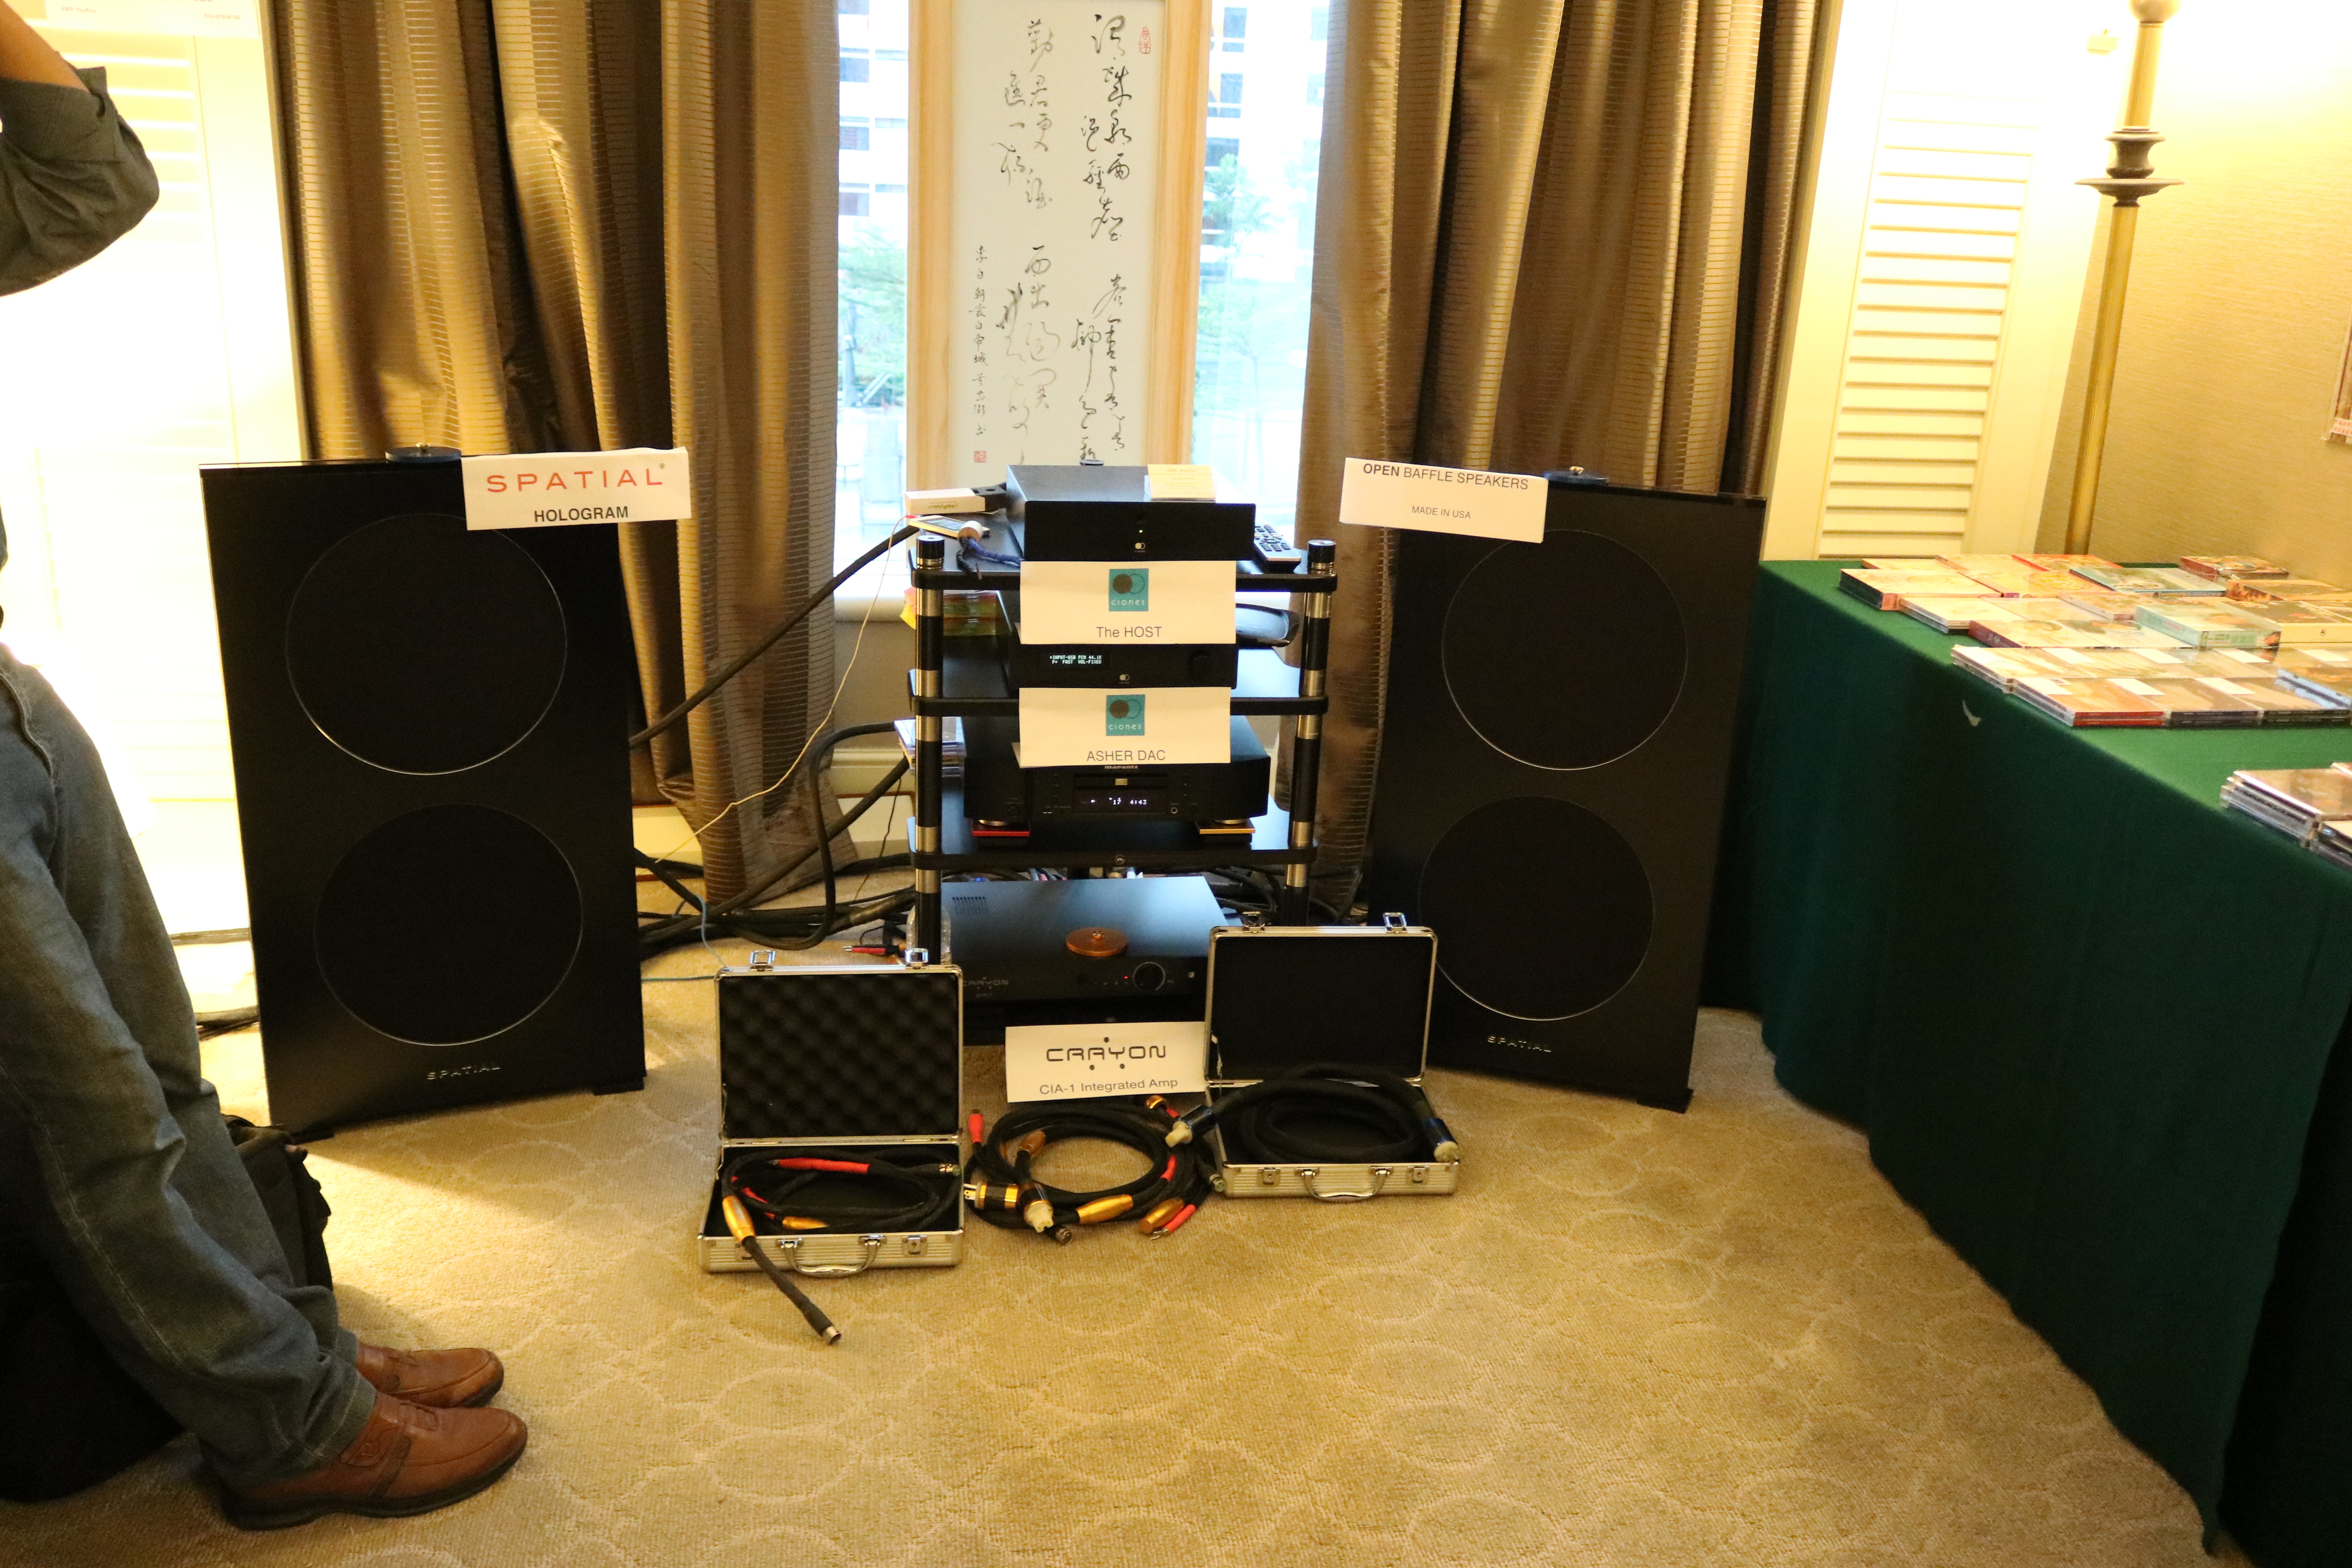 Spatial open baffle speakers and Clones components.